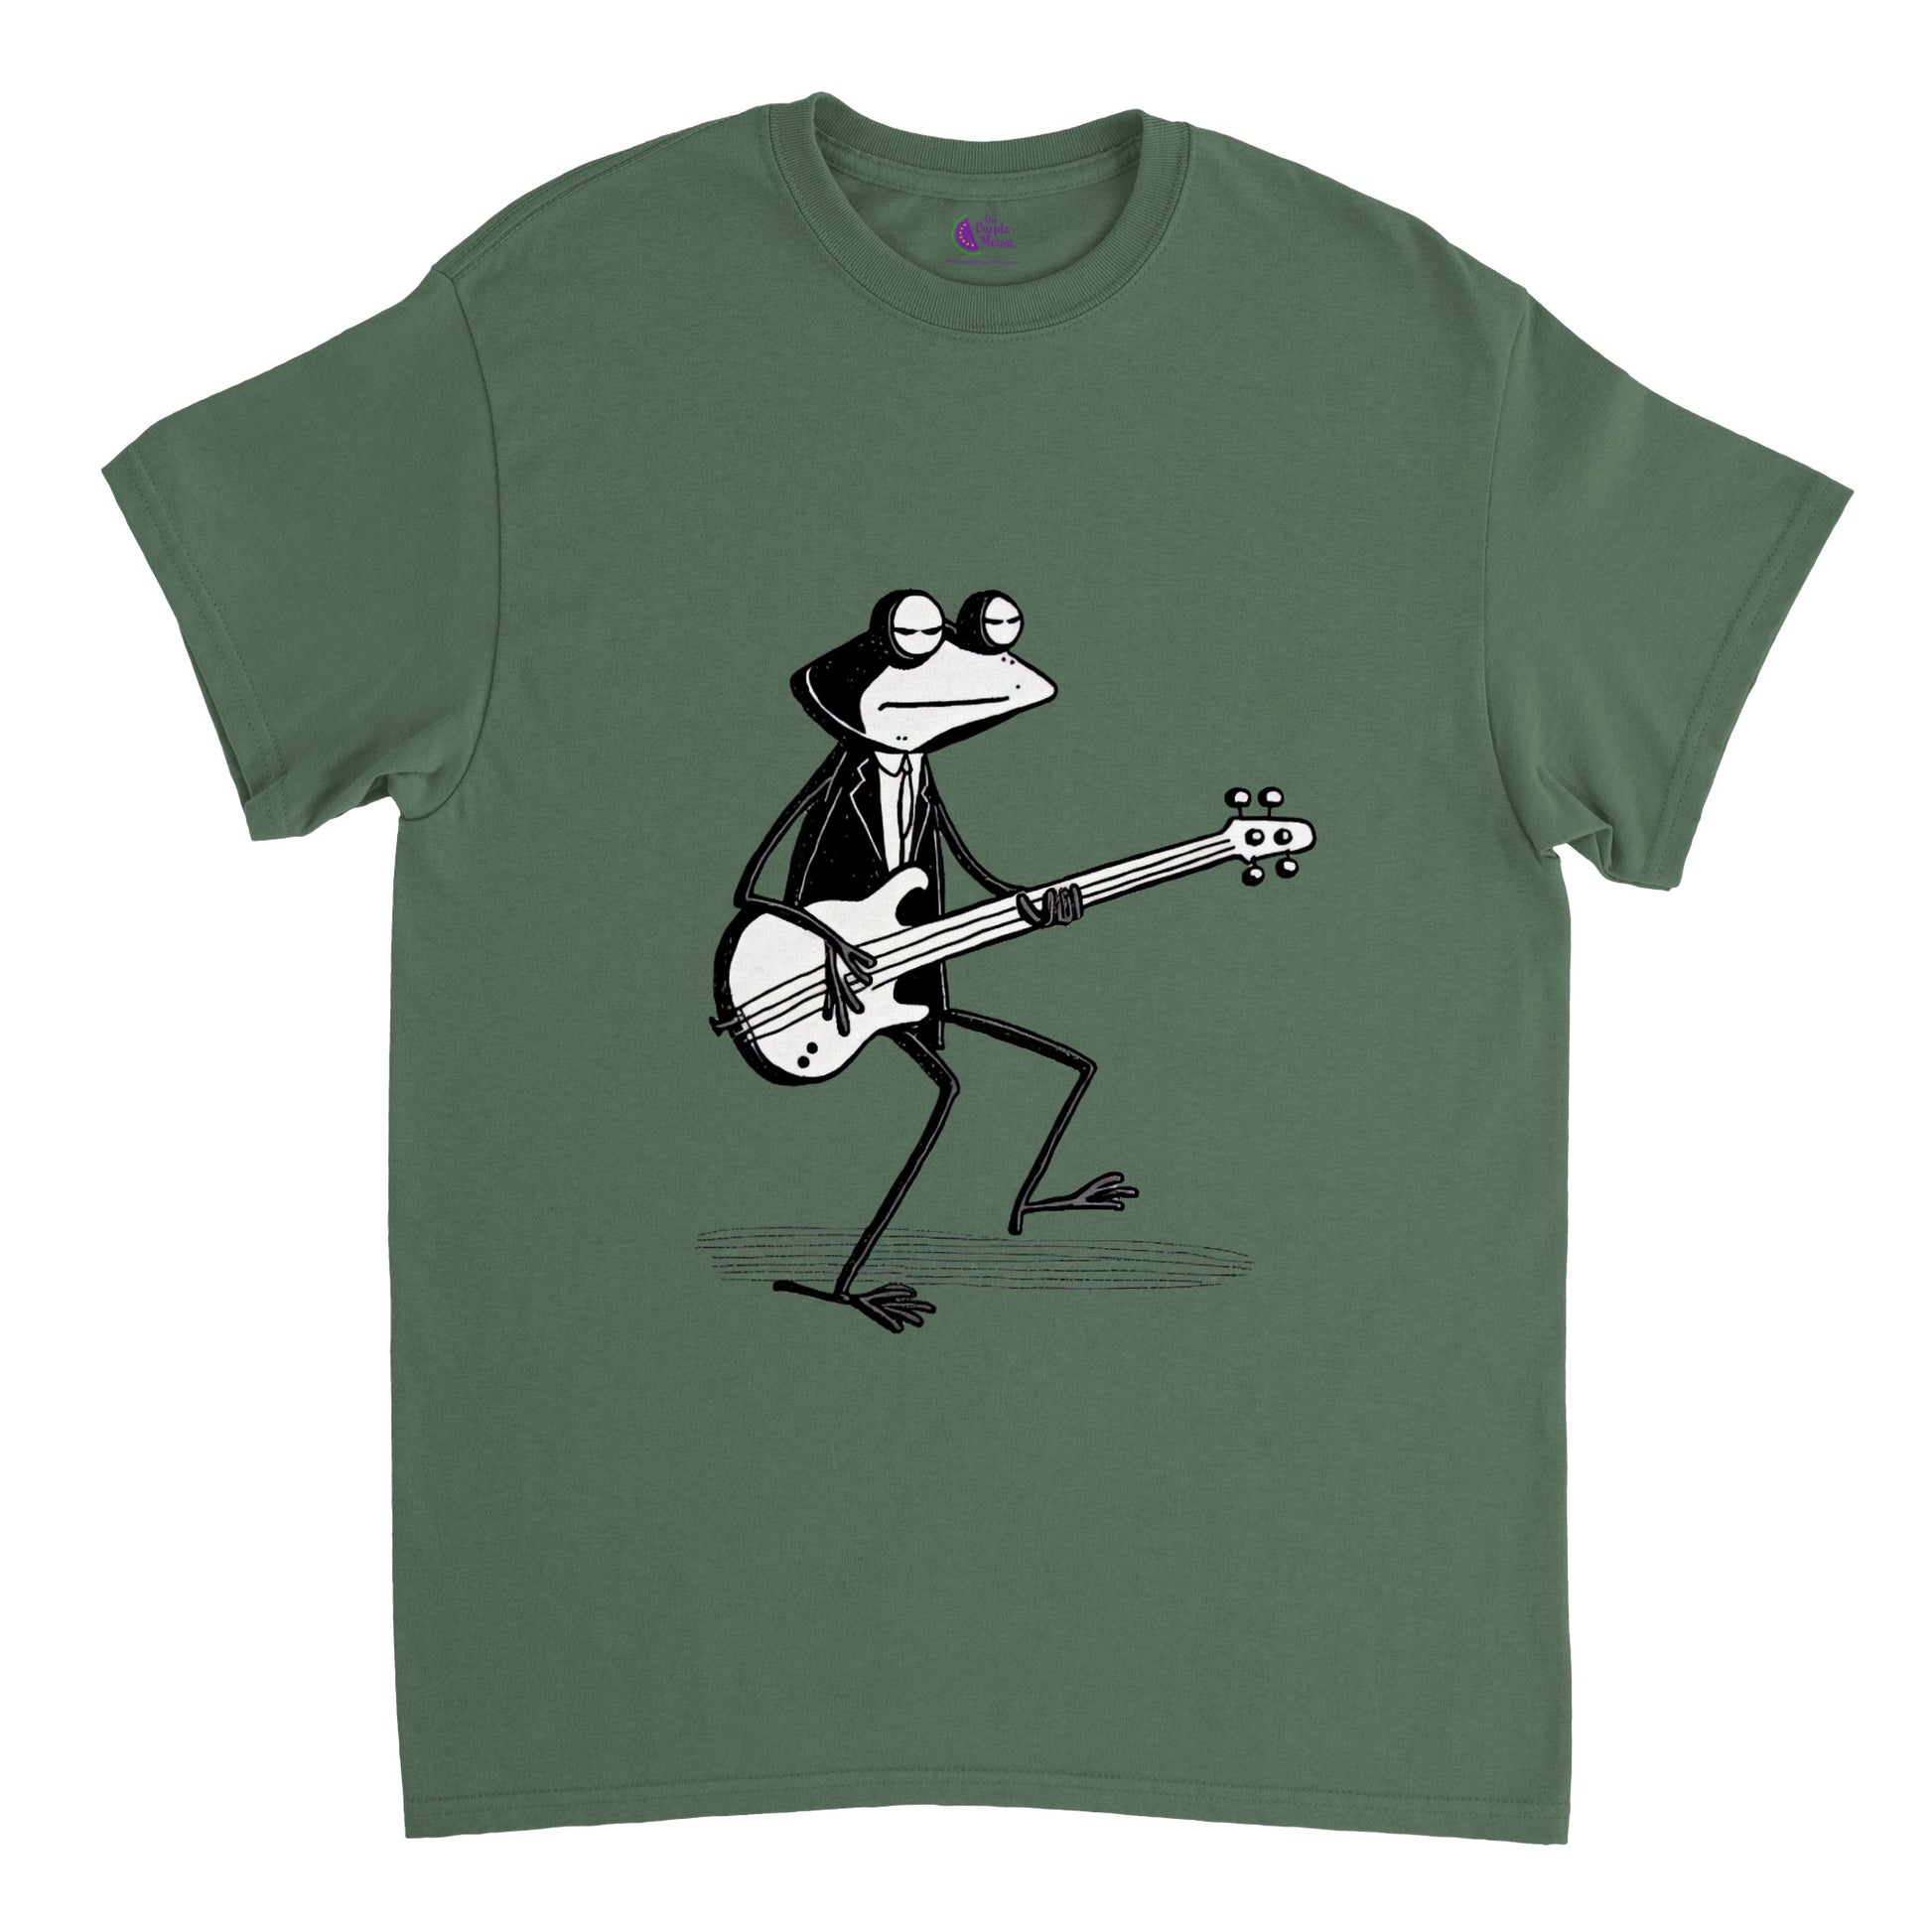 Green t-shirt with a frog playing a bass guitar print